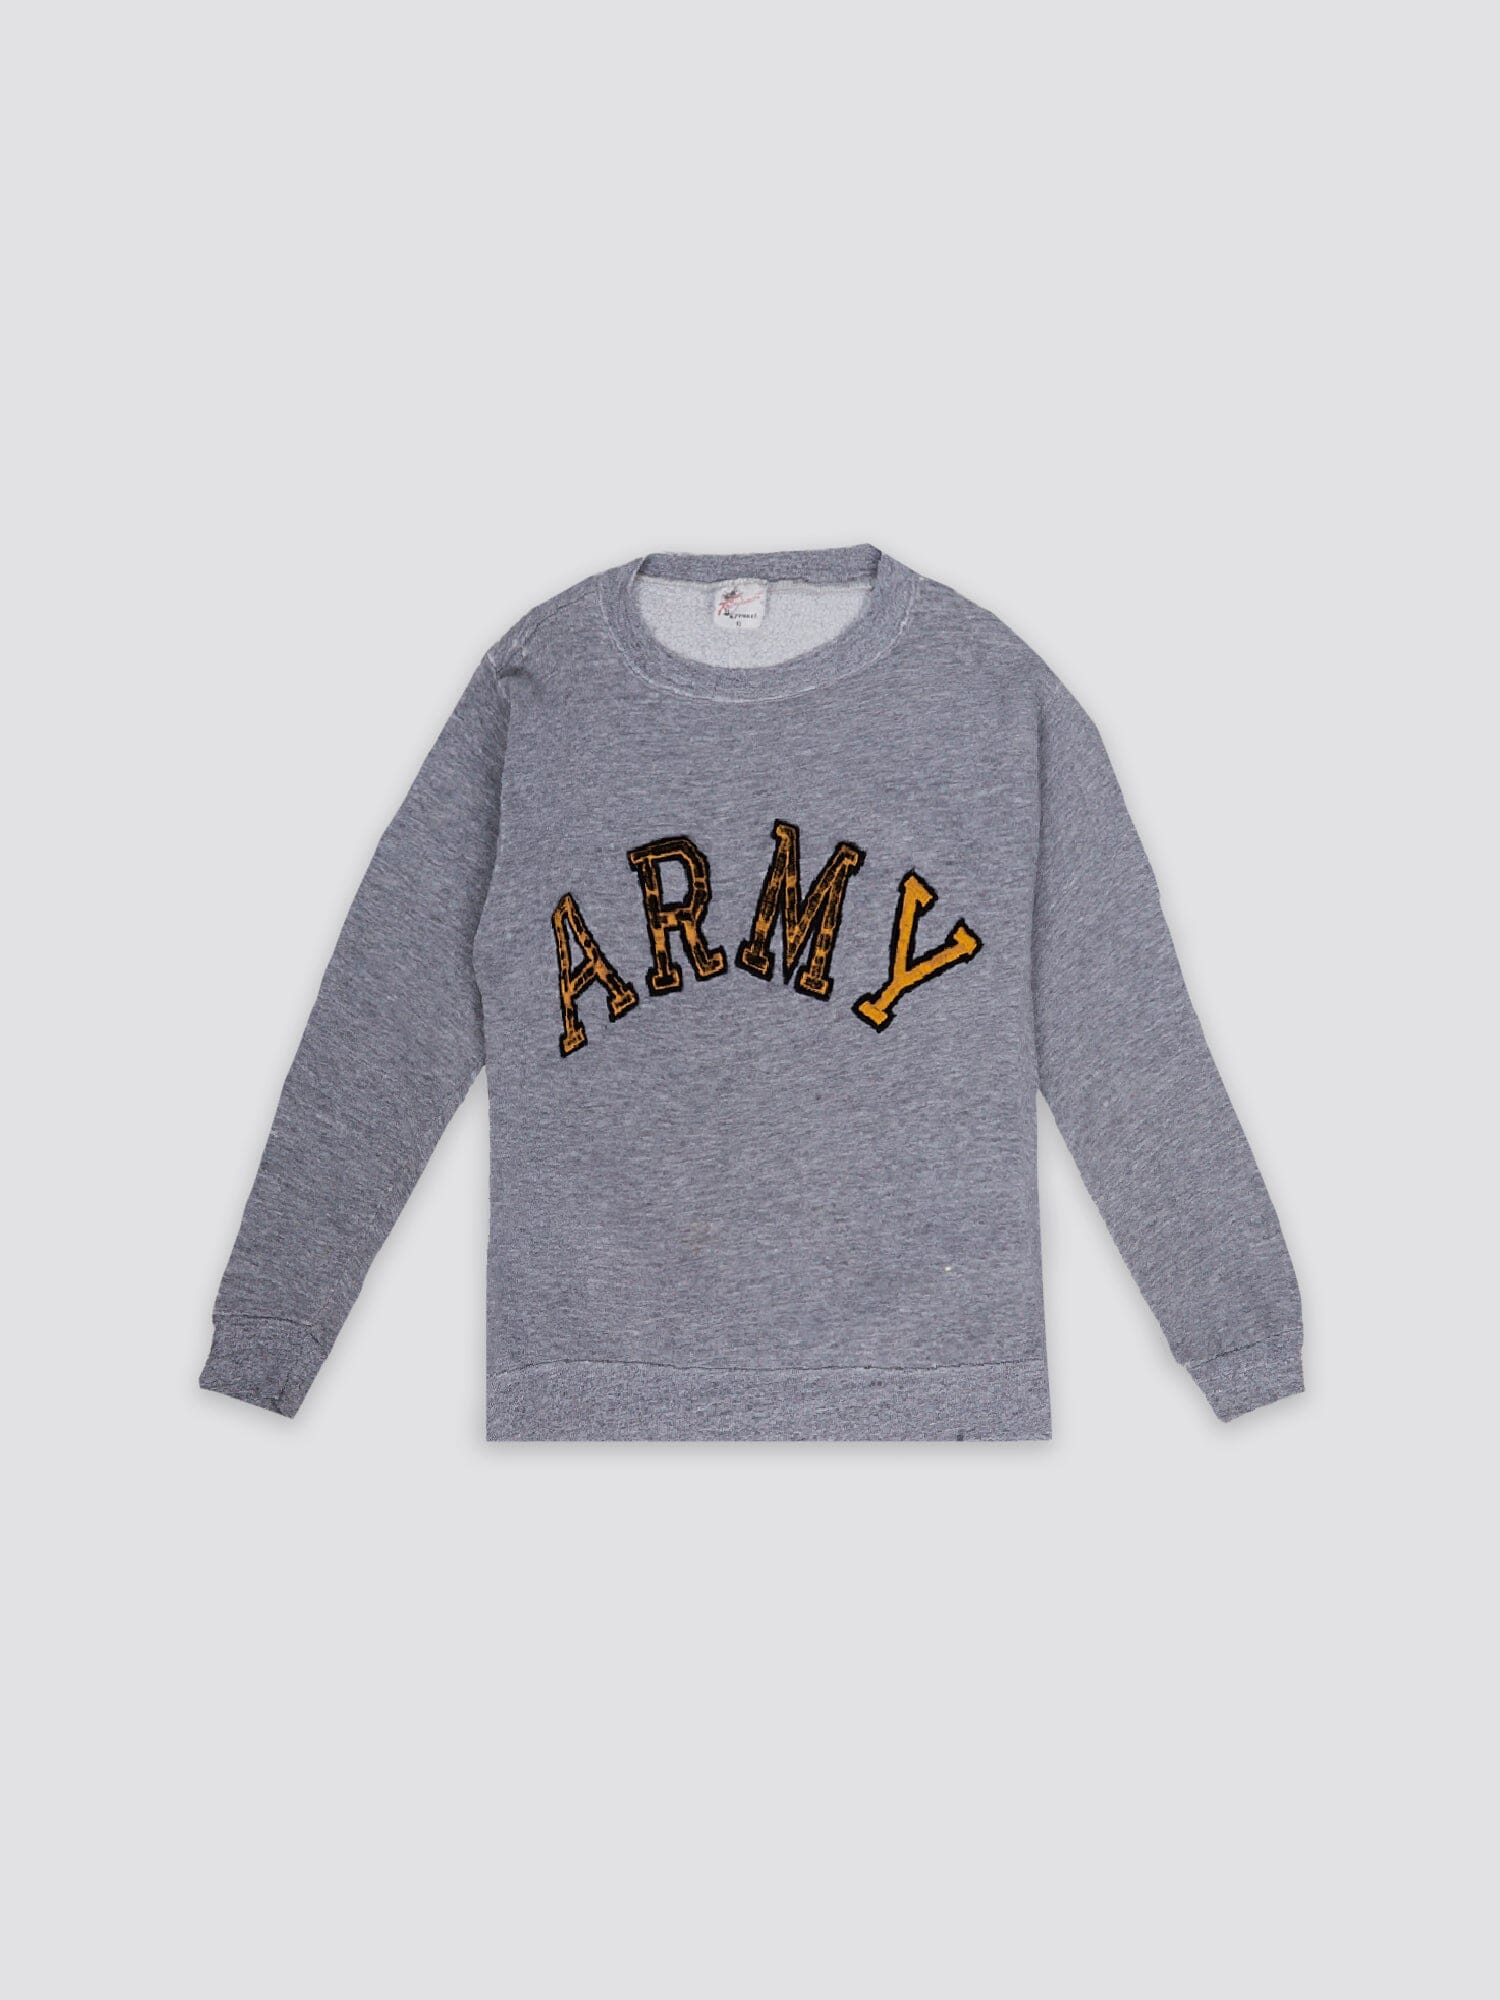 80S ARMY PATCHED CREW NECK SWEATSHIRT RESUPPLY Alpha Industries GRAY M 